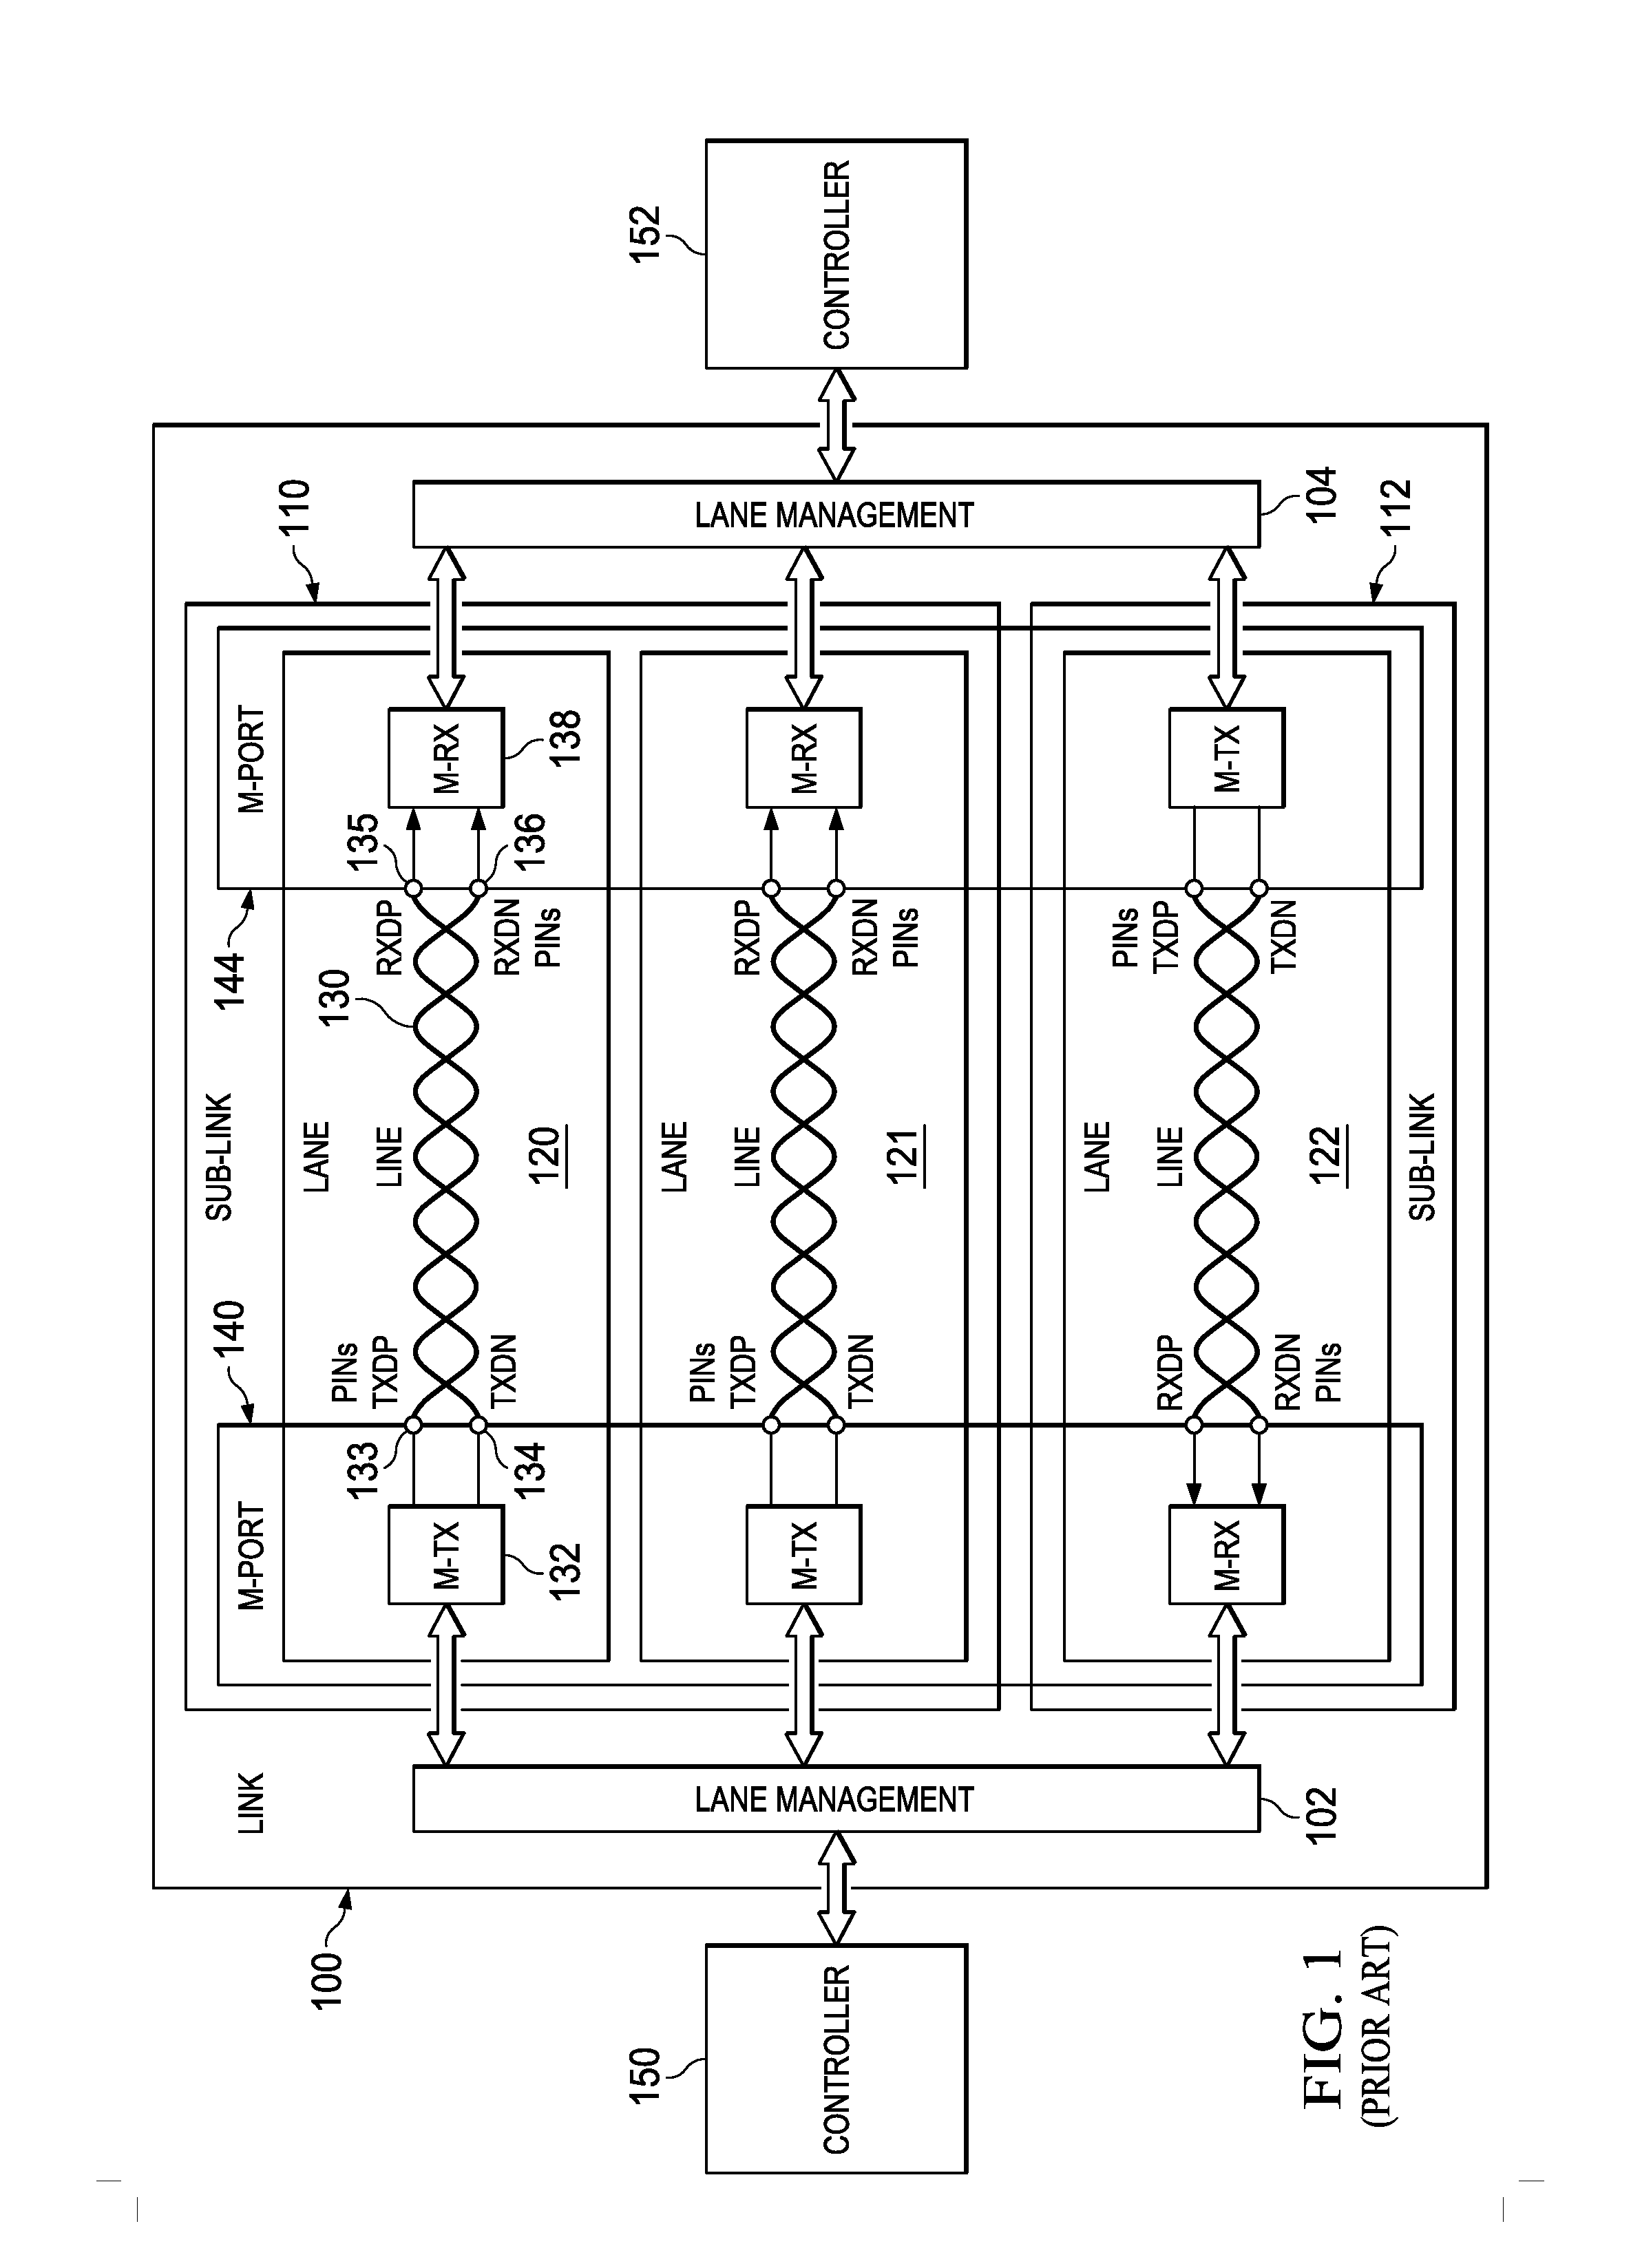 Scalable Multifunction Serial Link Interface